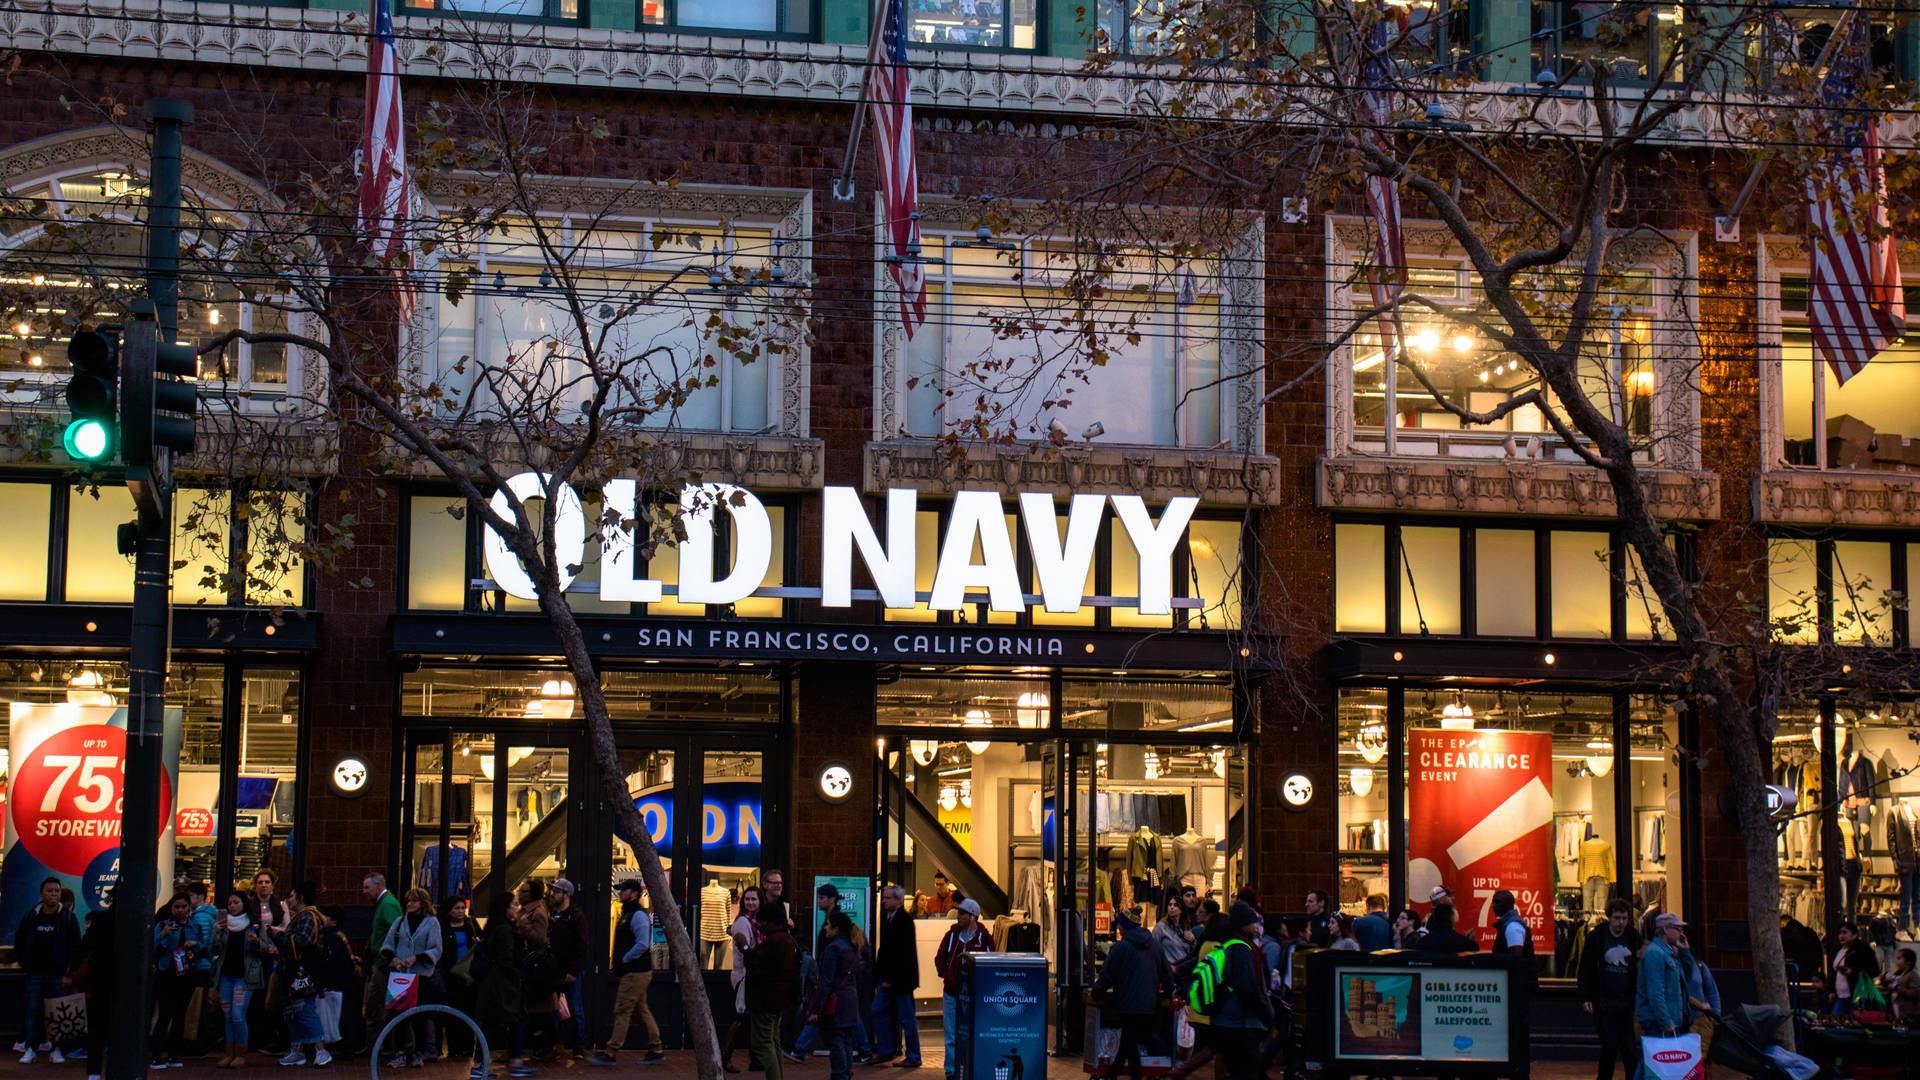 Old Navy San Francisco Store Background